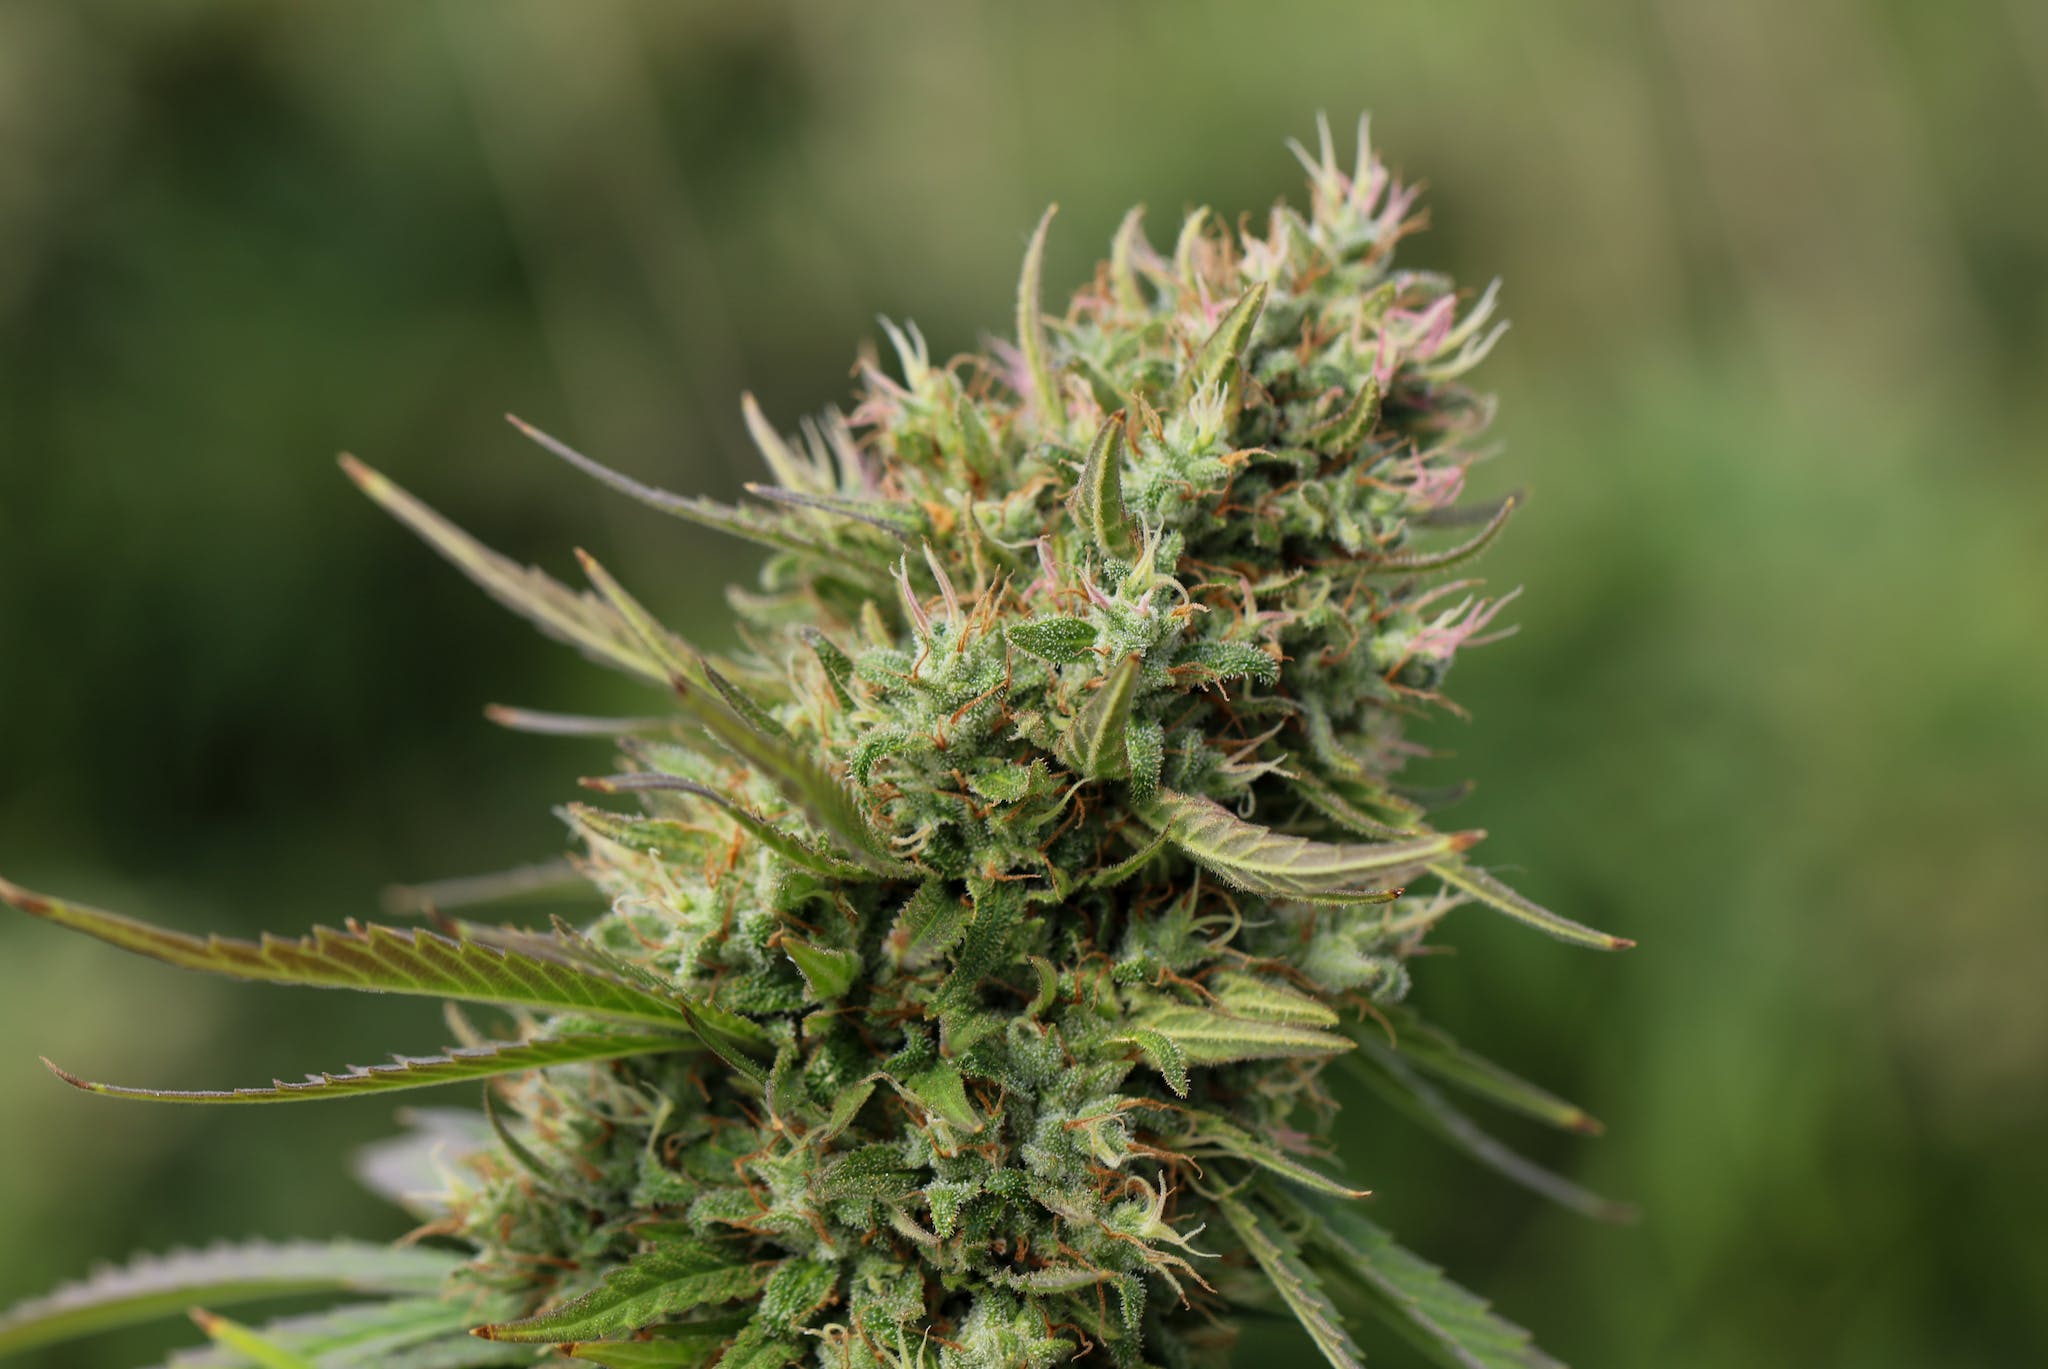 Close-up on thca cannabis plant showing its benefits